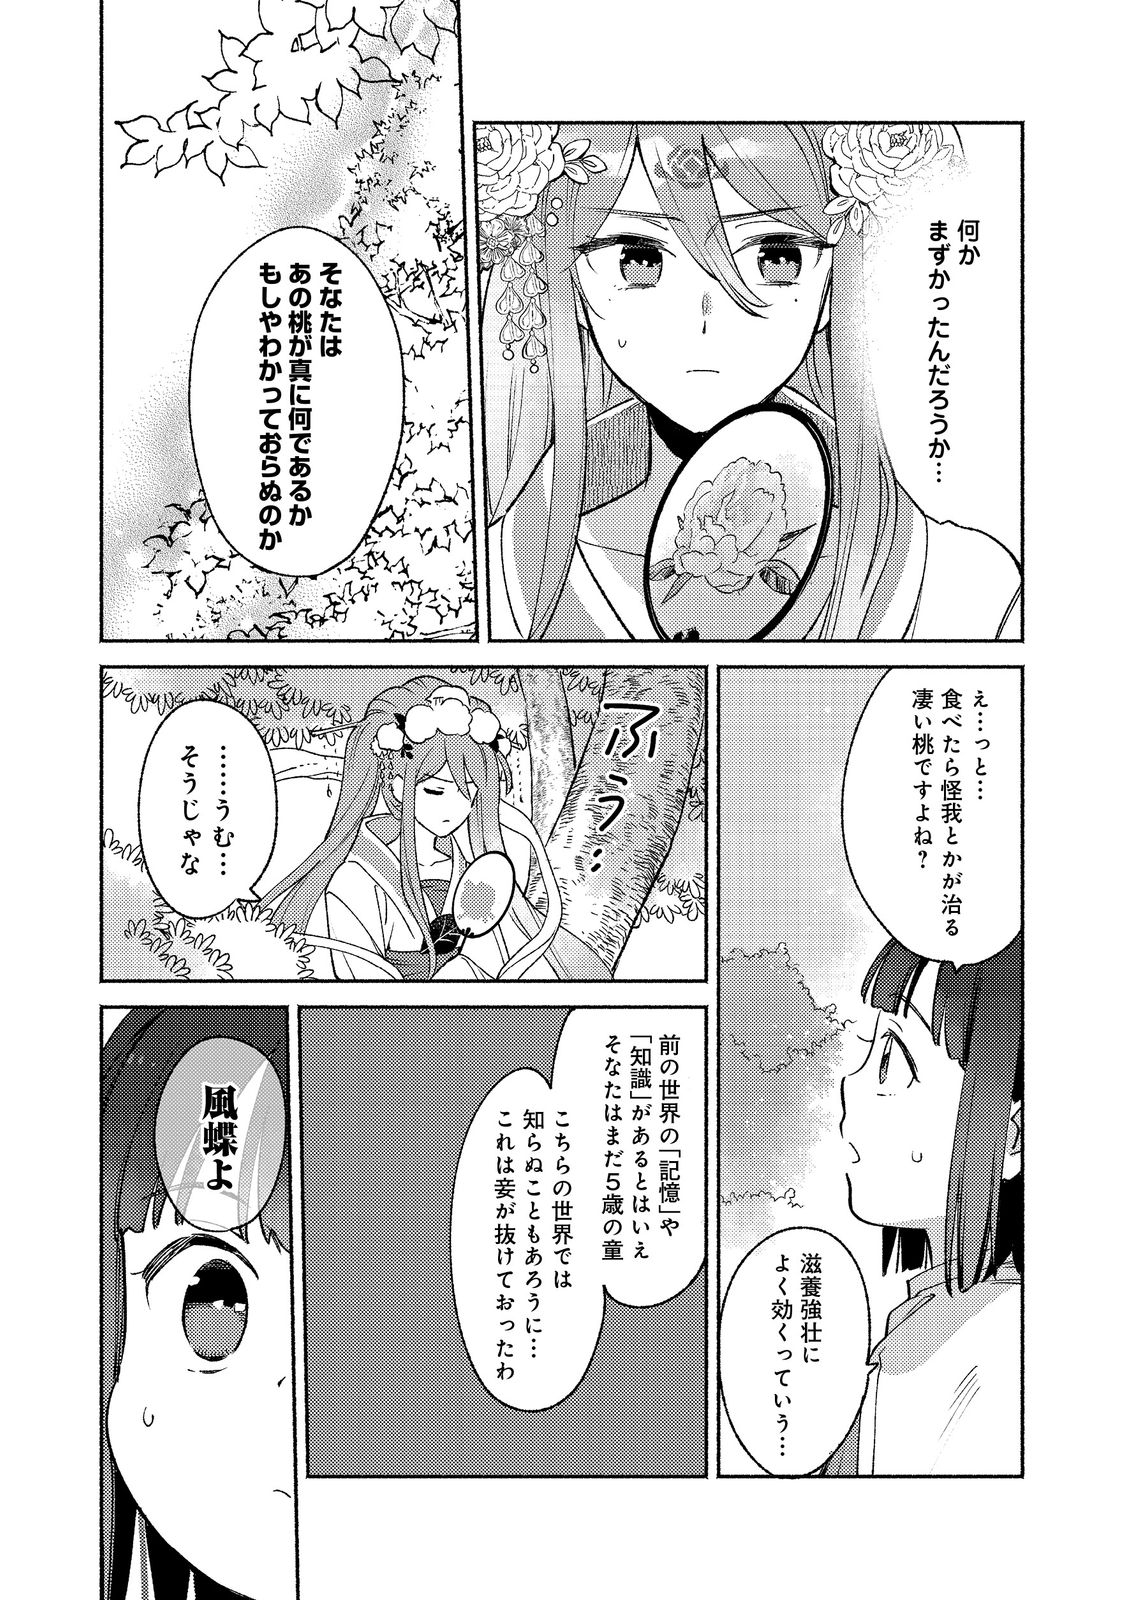 I’m the White Pig Nobleman 第16.1話 - Page 3